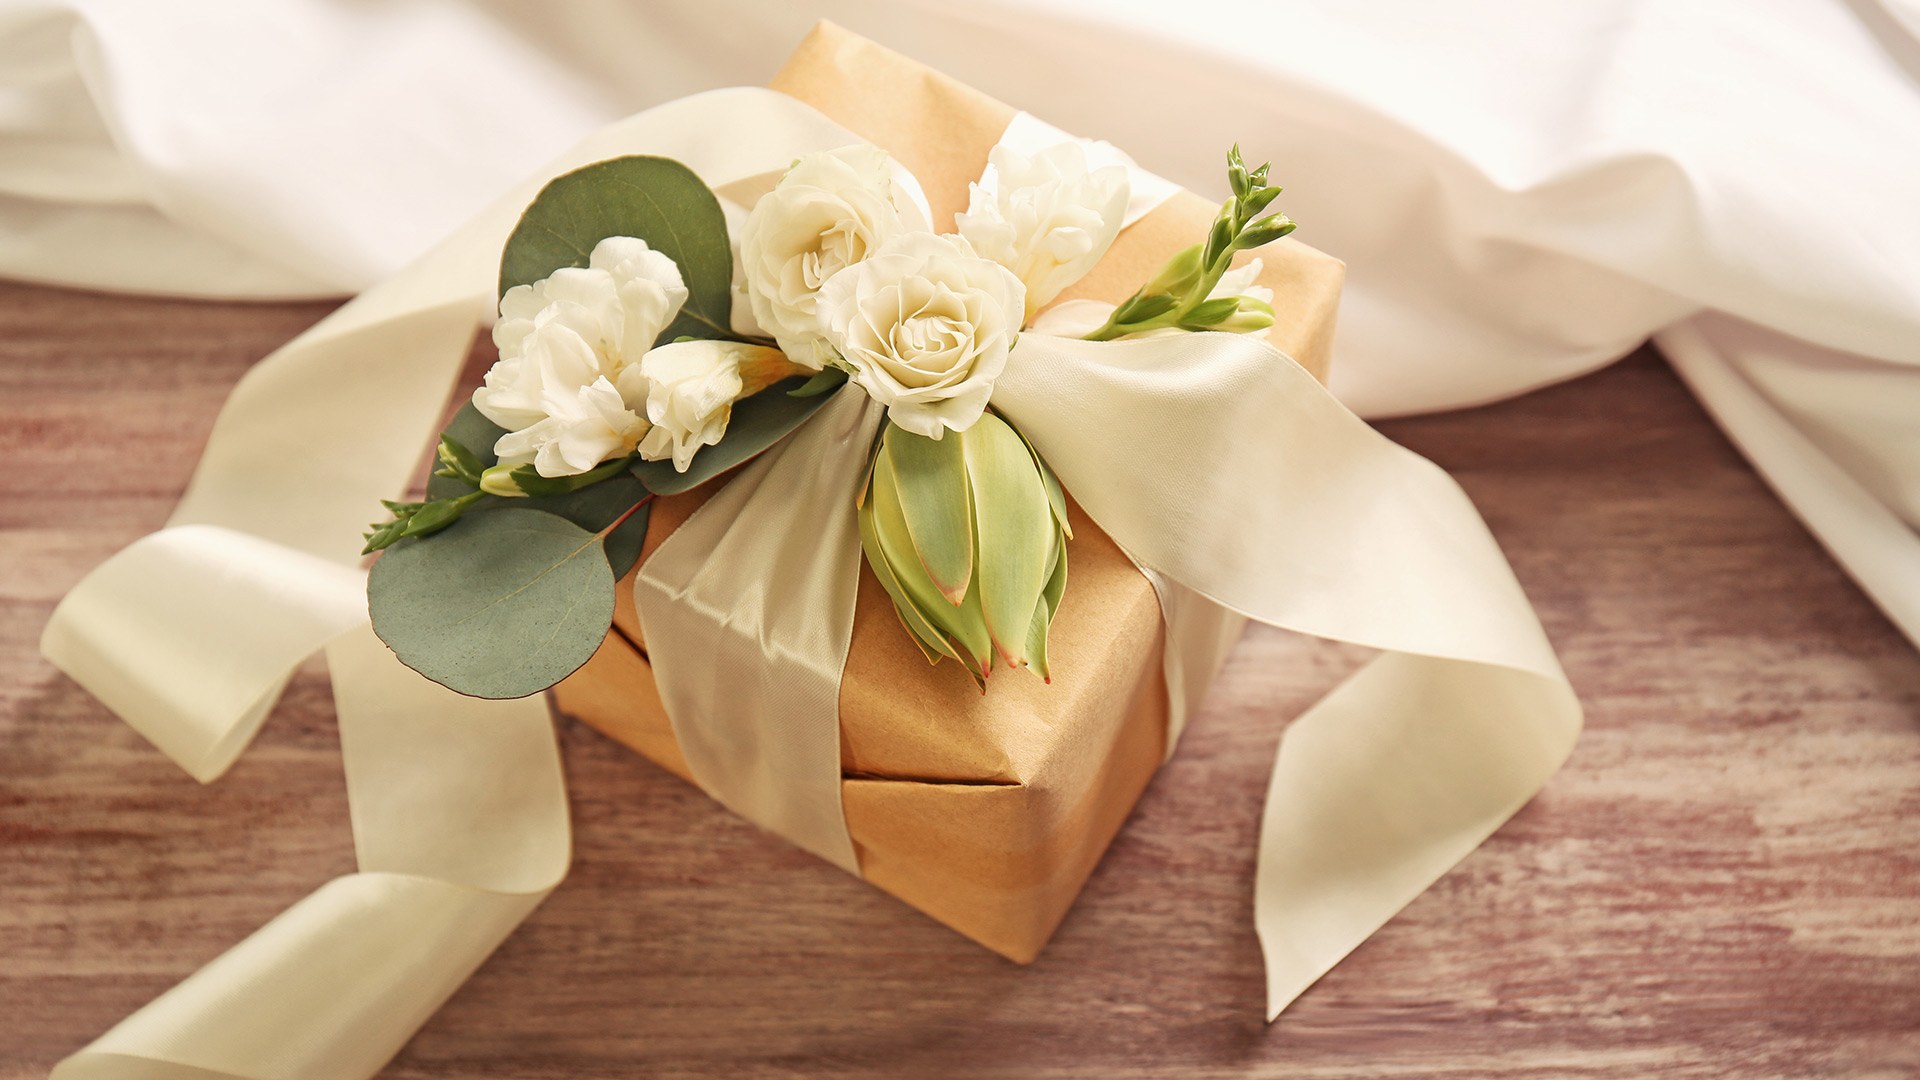 Top 10 Most Luxurious Wedding Gift Ideas for Wealthy Couple